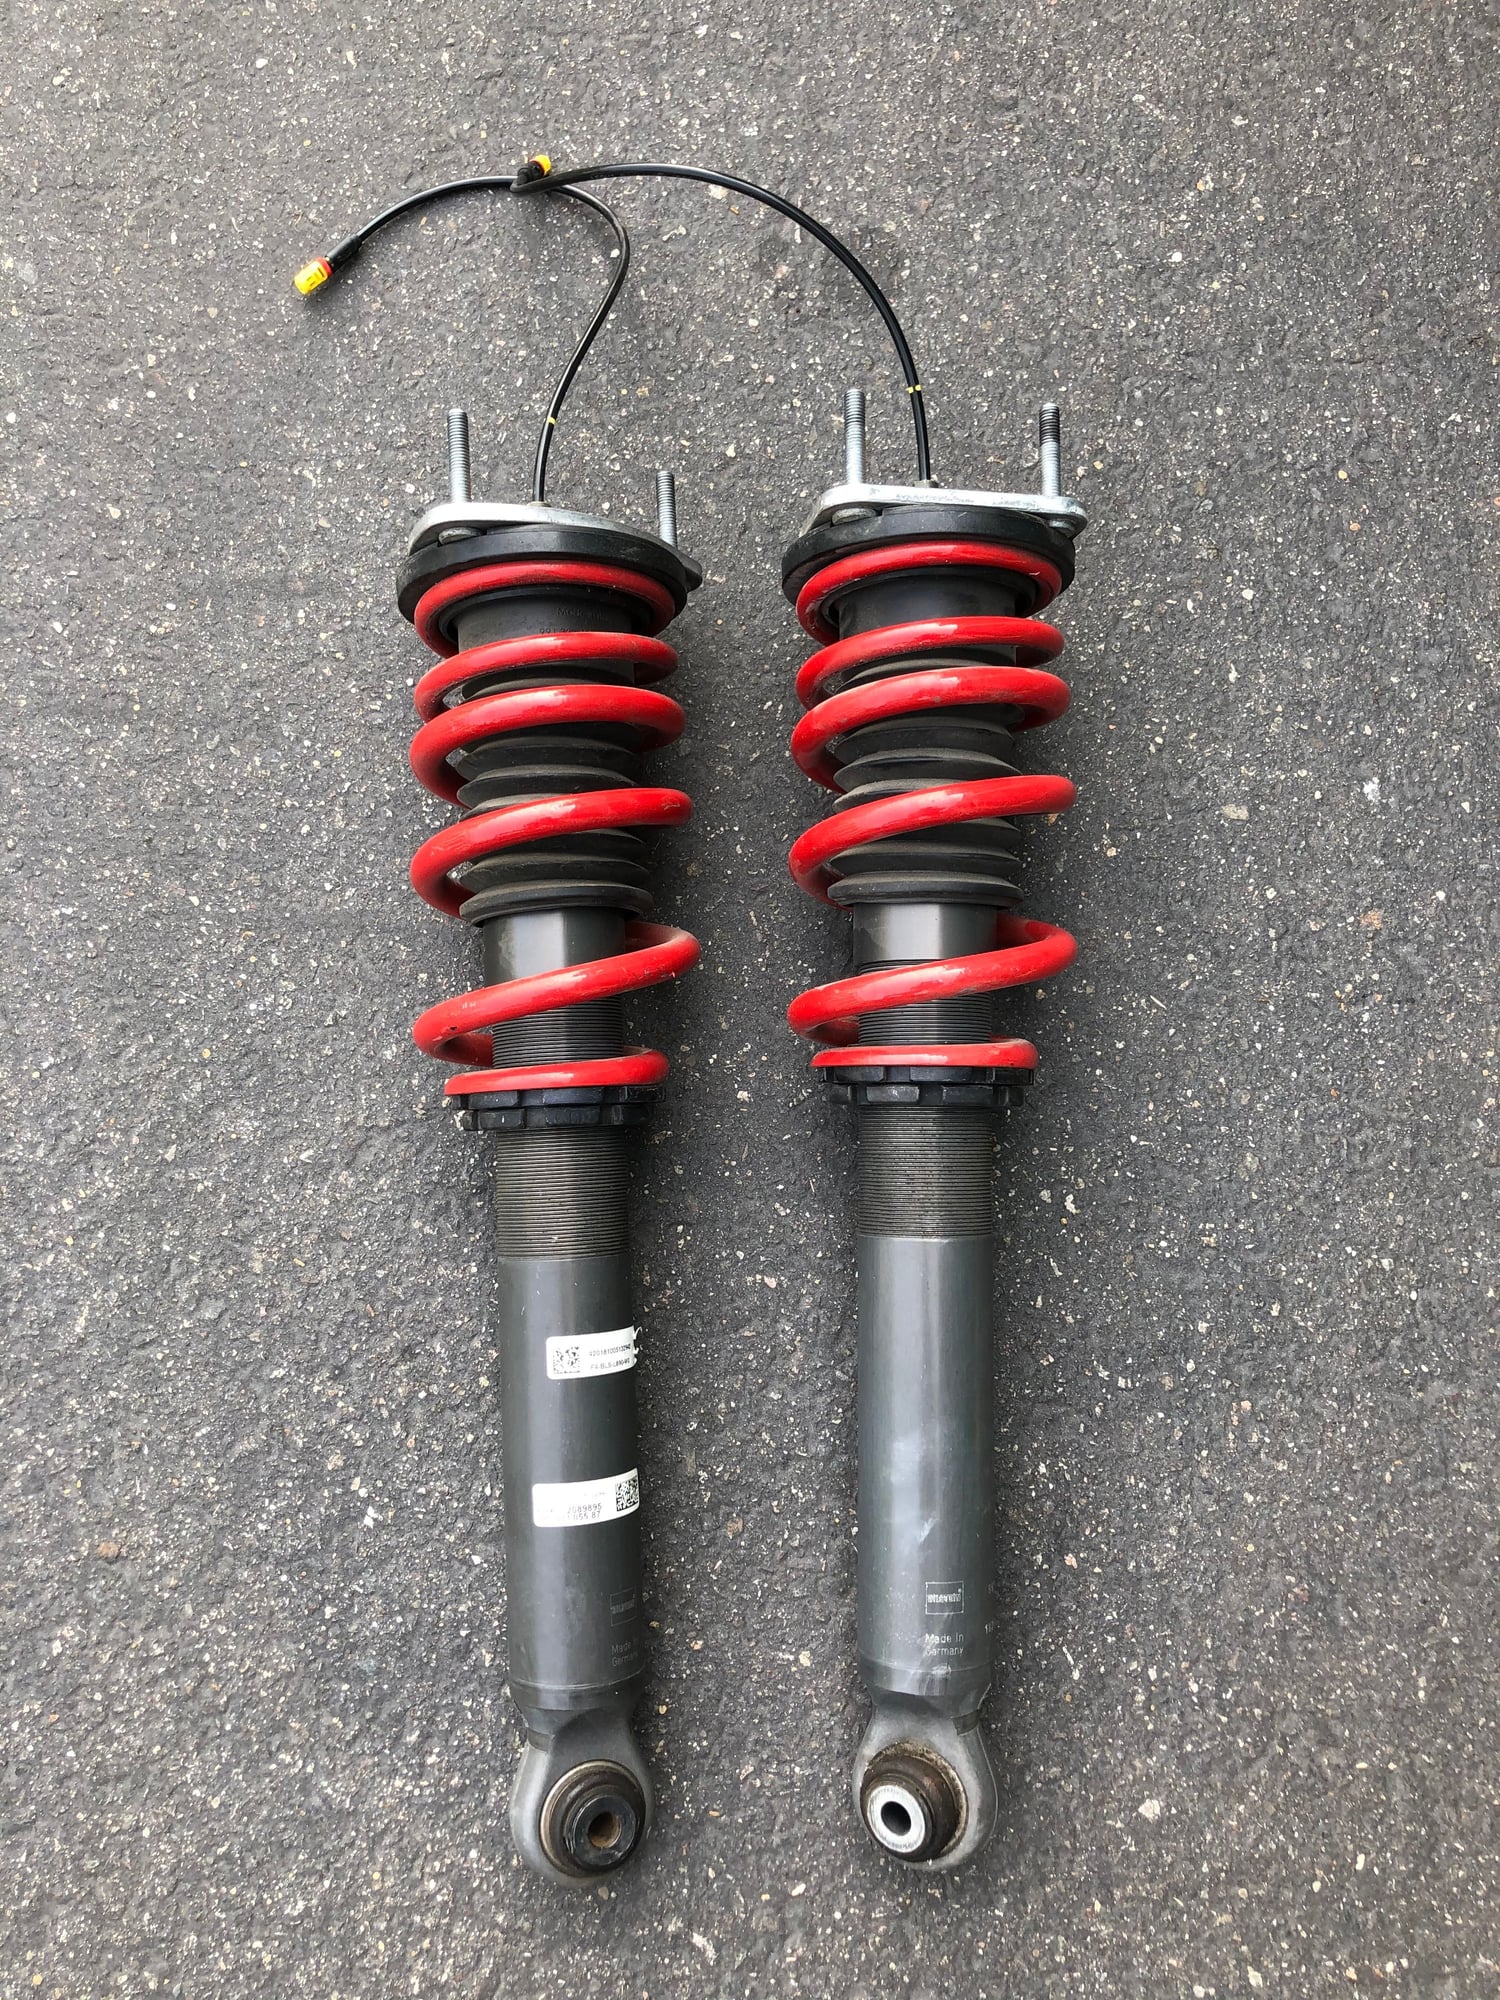 2018 Porsche GT3 - 2 rear coil-overs with stock springs - Accessories - $1,000 - Irvine, CA 92620, United States